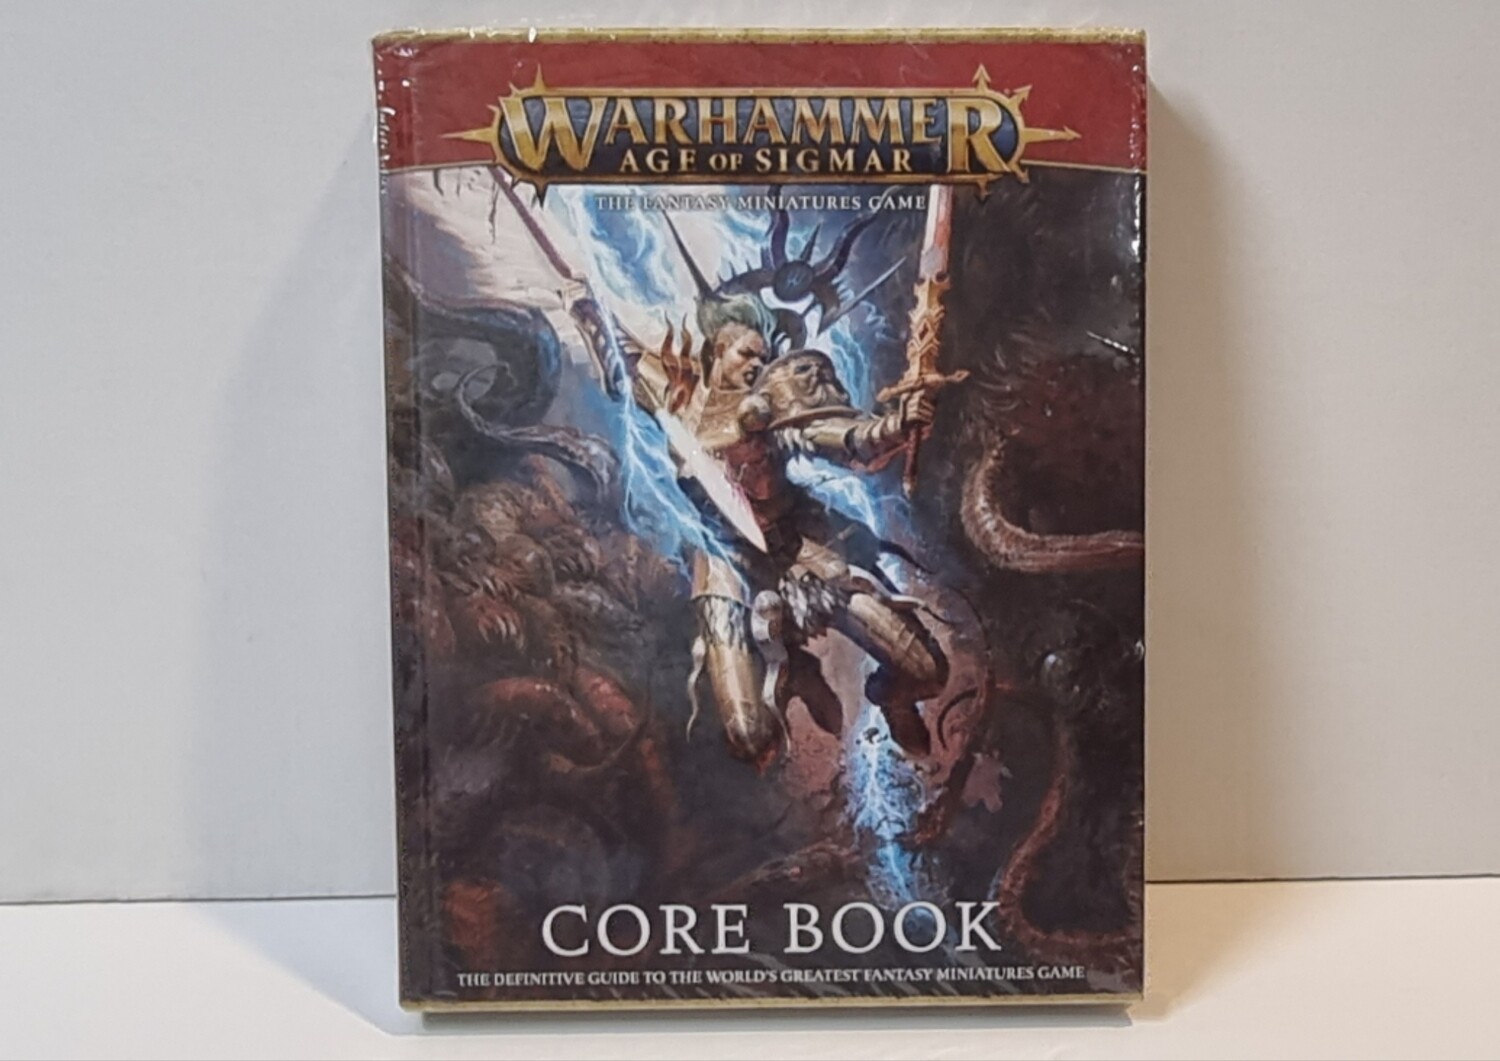 Warhammer, Age of Sigmar, Core Book, The defenitive guide to the world's greatest fantasy miniatures game